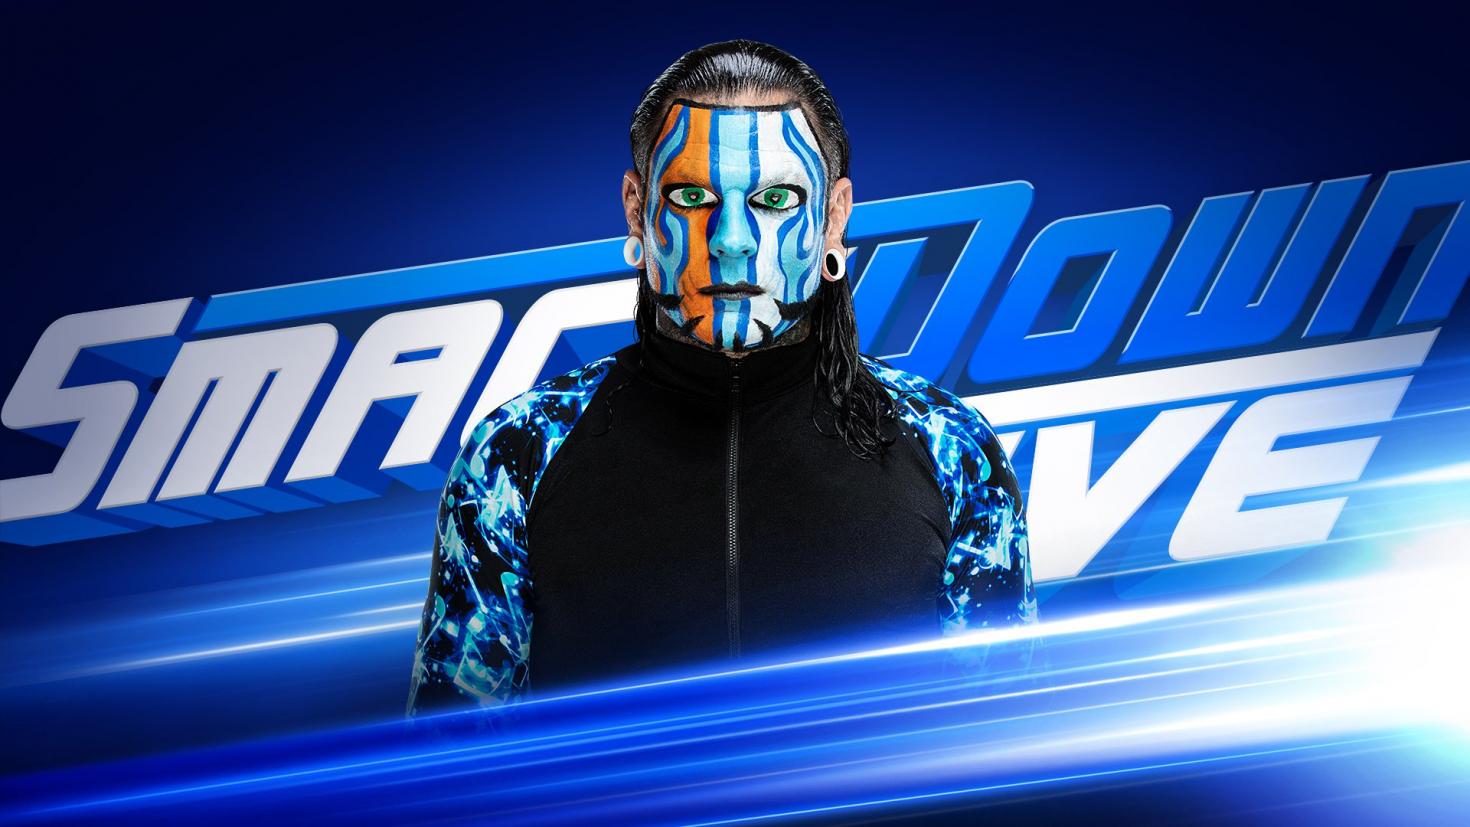 WWE Smackdown Preview and Predictions: May 8, 2020